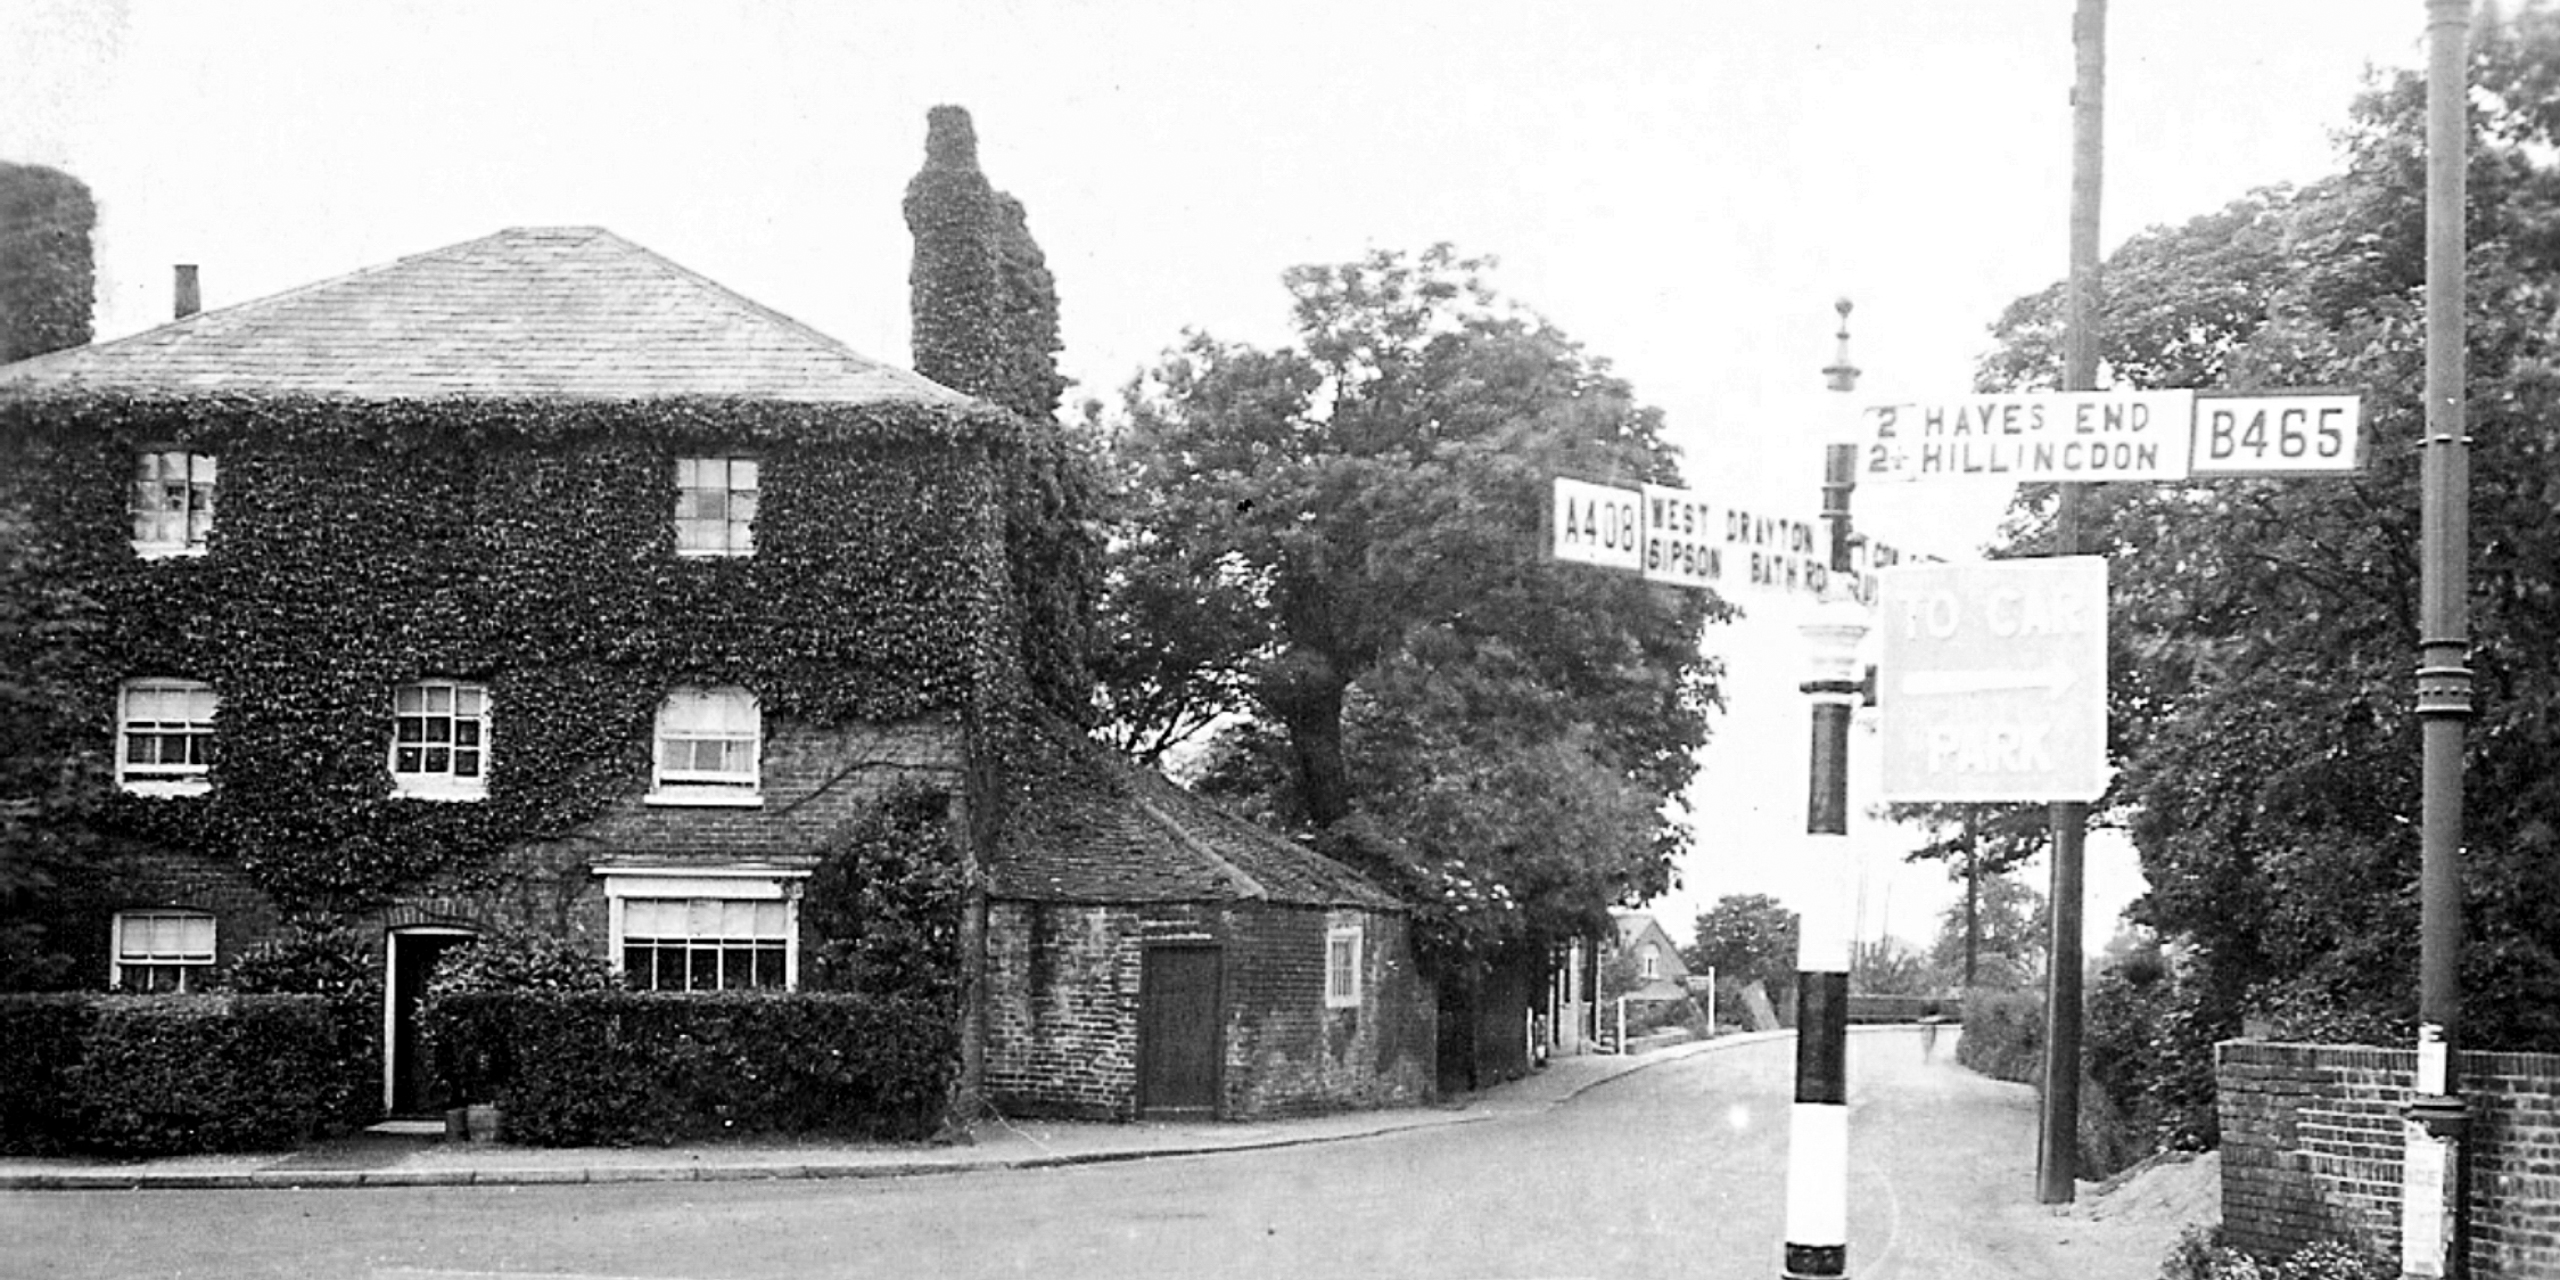 Now & Then - Junction of High Street and Falling Lane, Yiewsley - 2019 vs c.1920